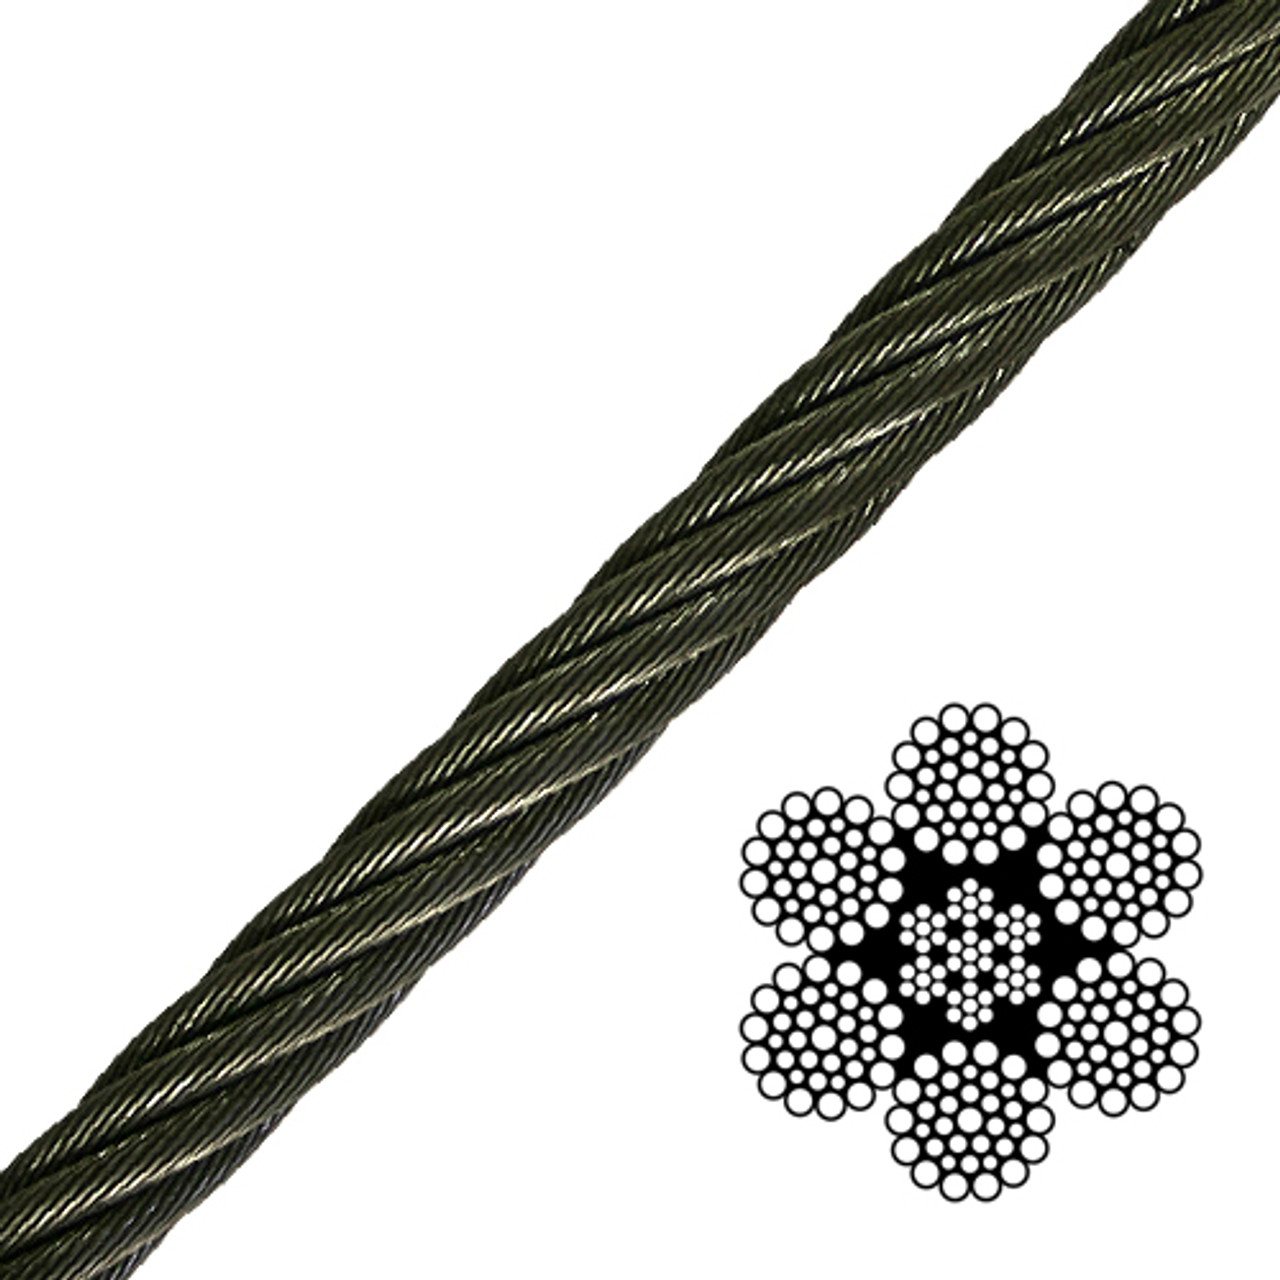 1-1/8 6x36 Class Wire Rope - 130000 lbs Breaking Strength